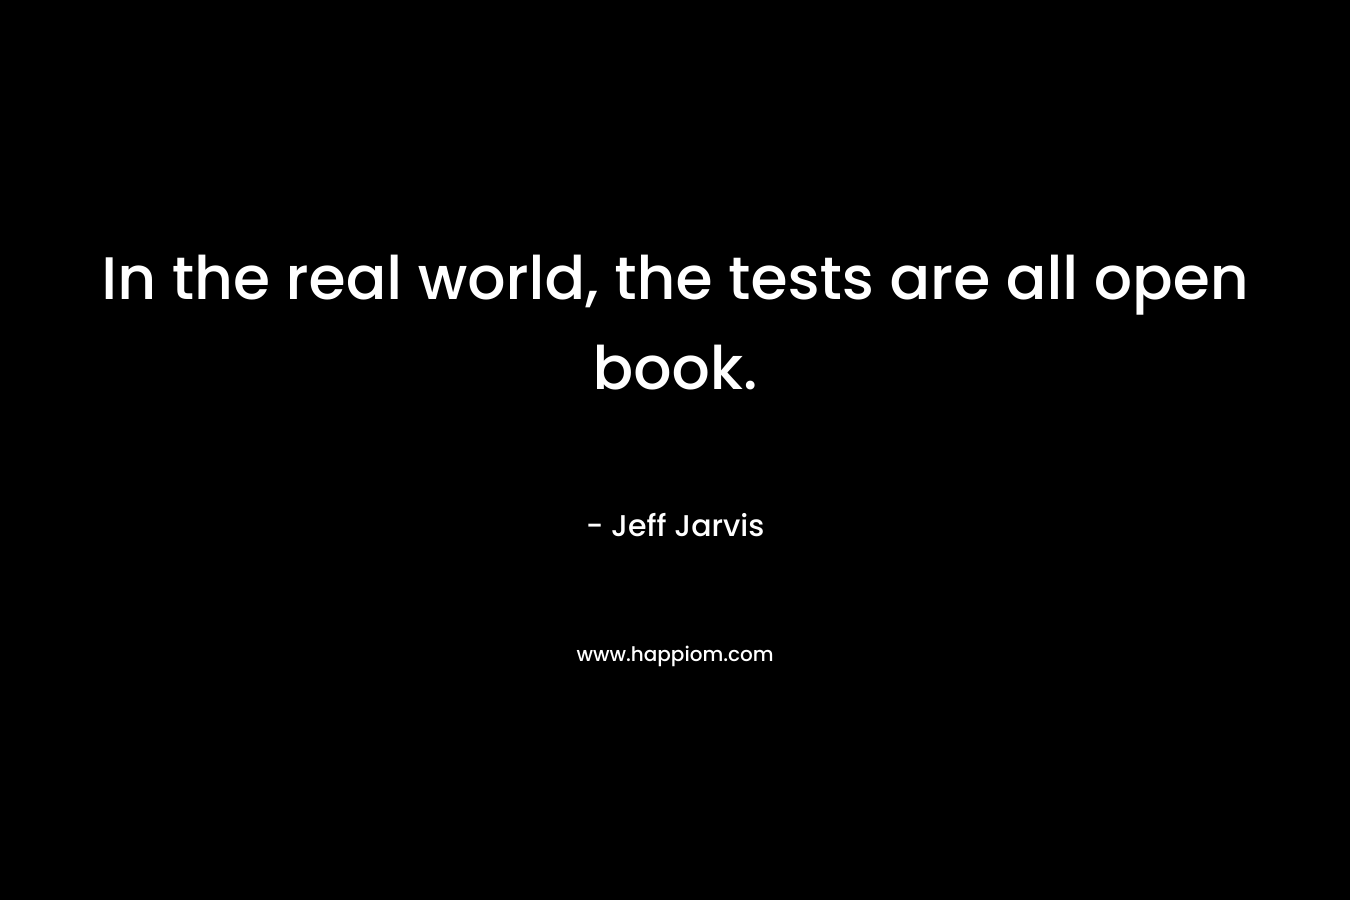 In the real world, the tests are all open book. – Jeff Jarvis